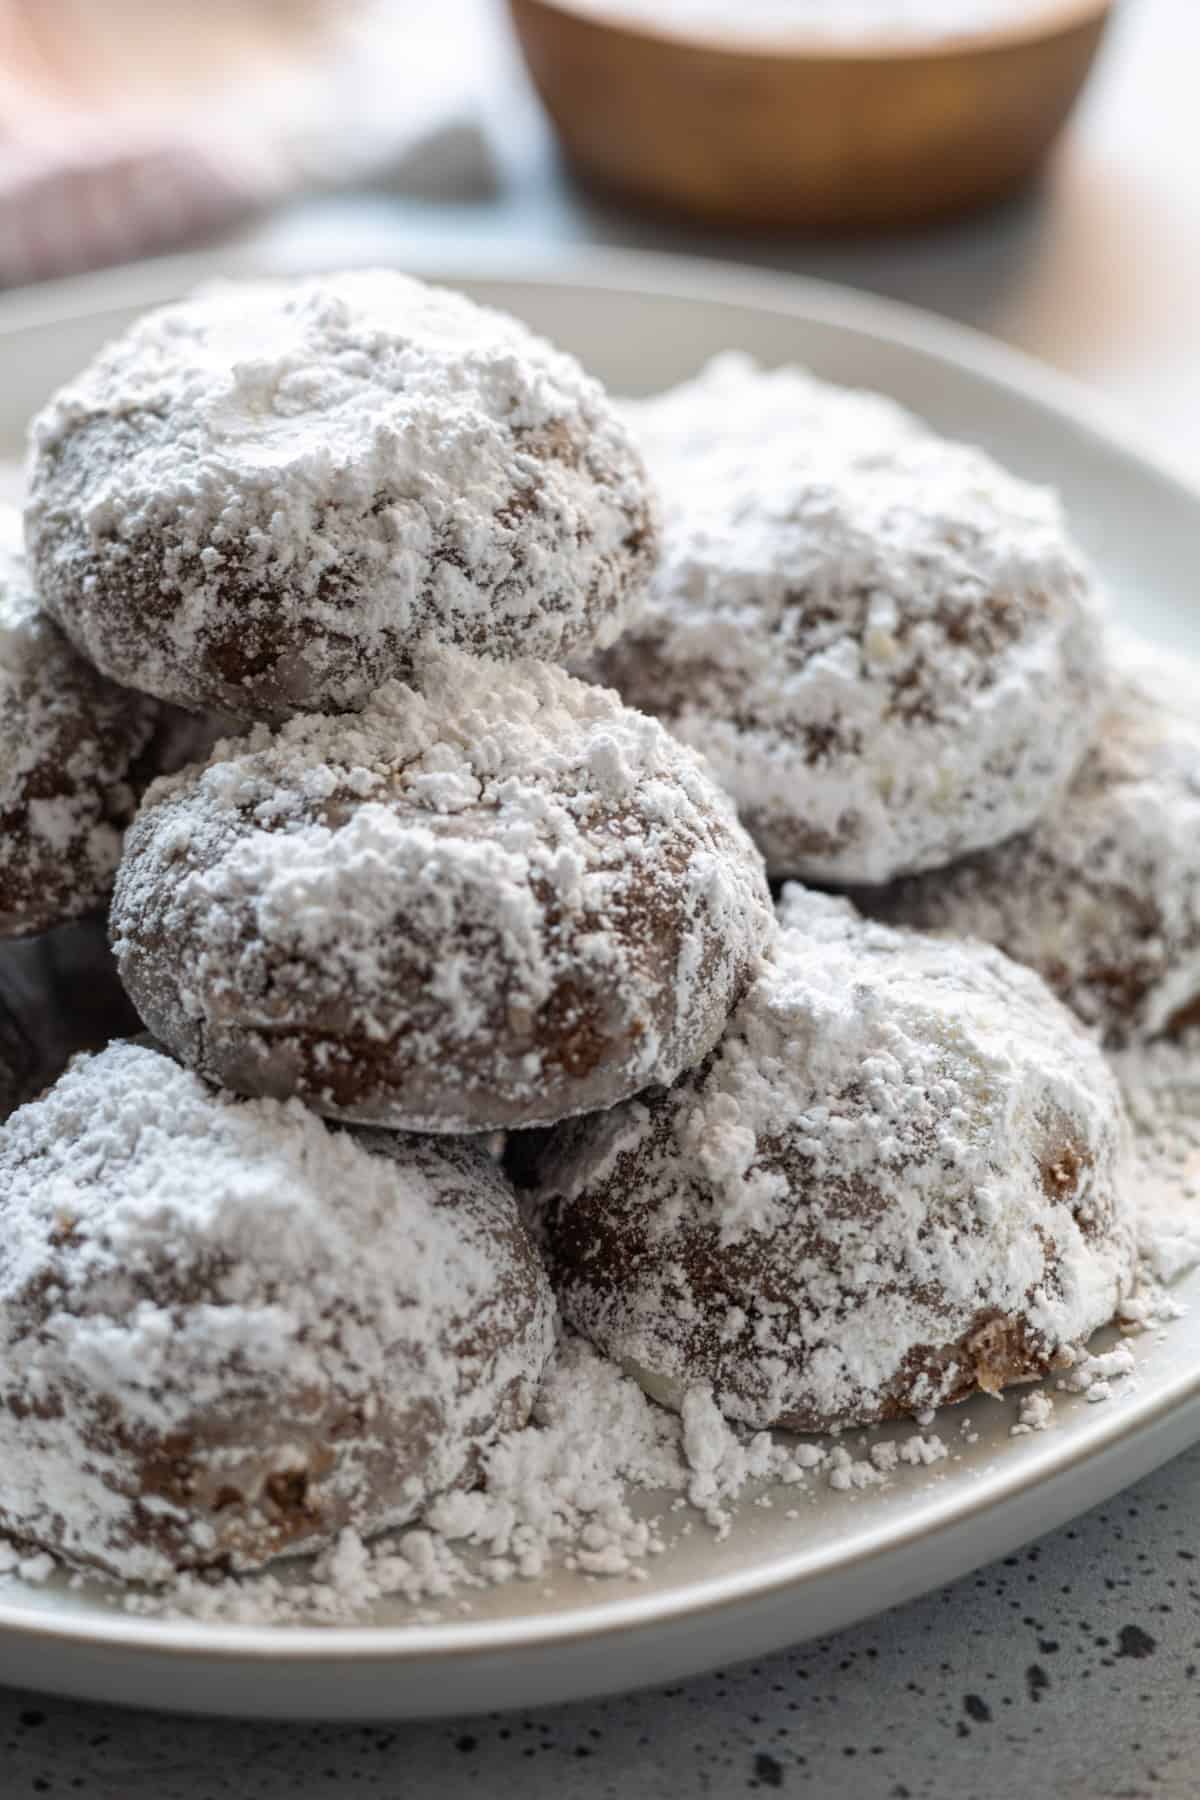 A pile of powdered sugar mocha cookies on a plate.